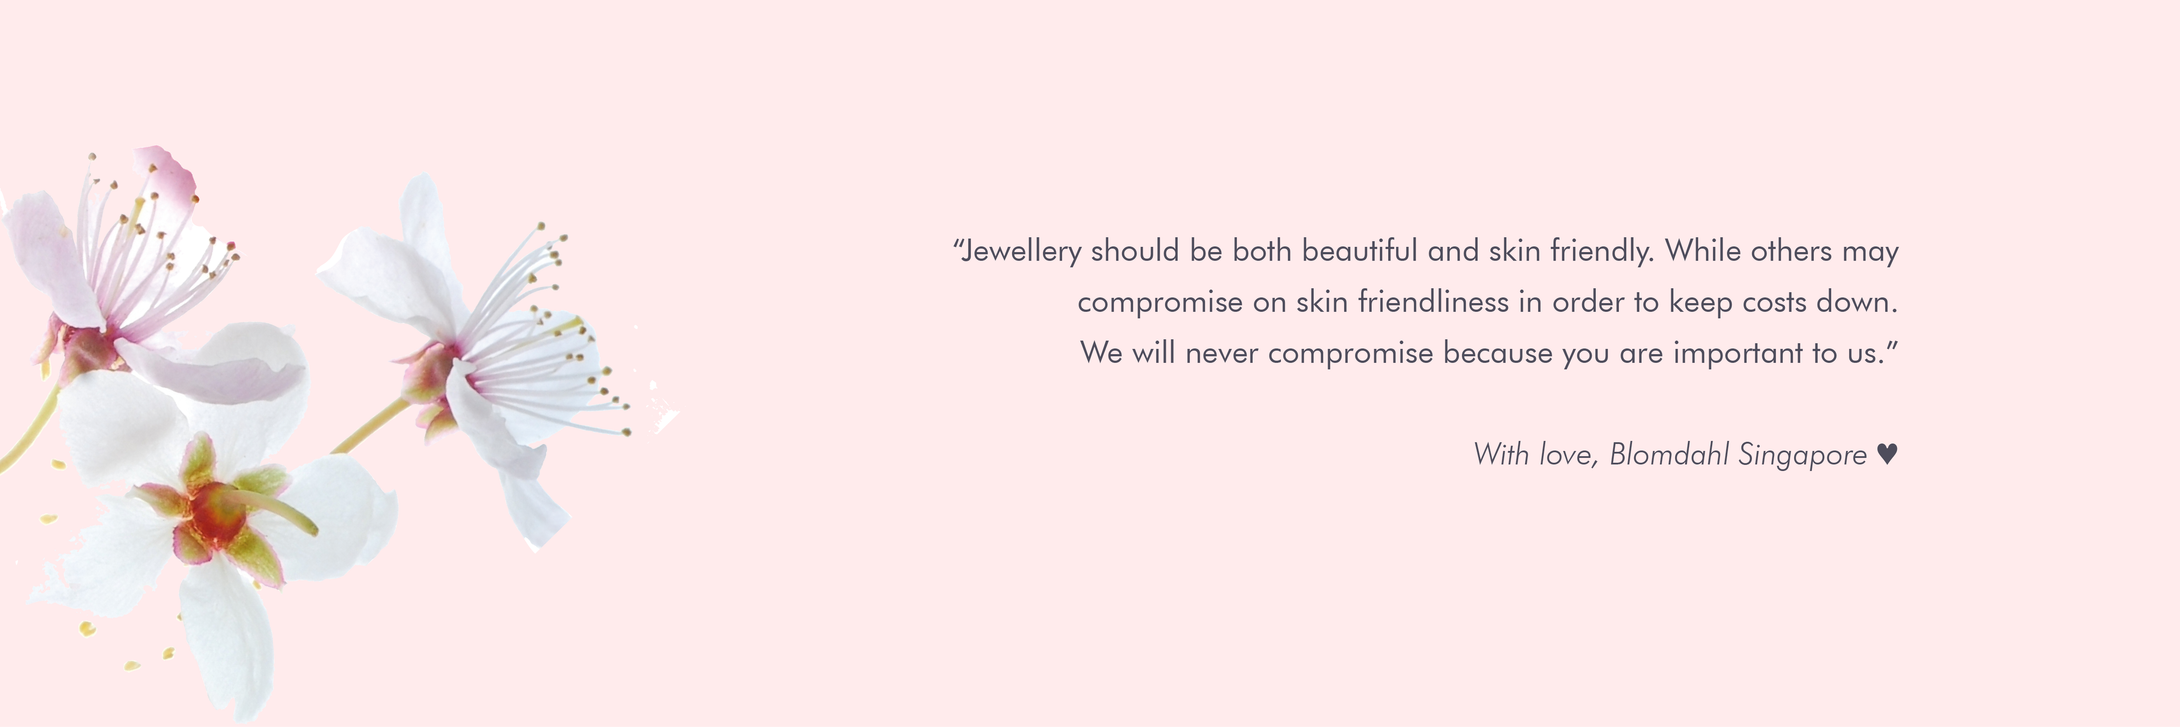 The promise of Blomdahl Singapore. To create beautiful skin friendly jewellery without compromising on quality due to costs